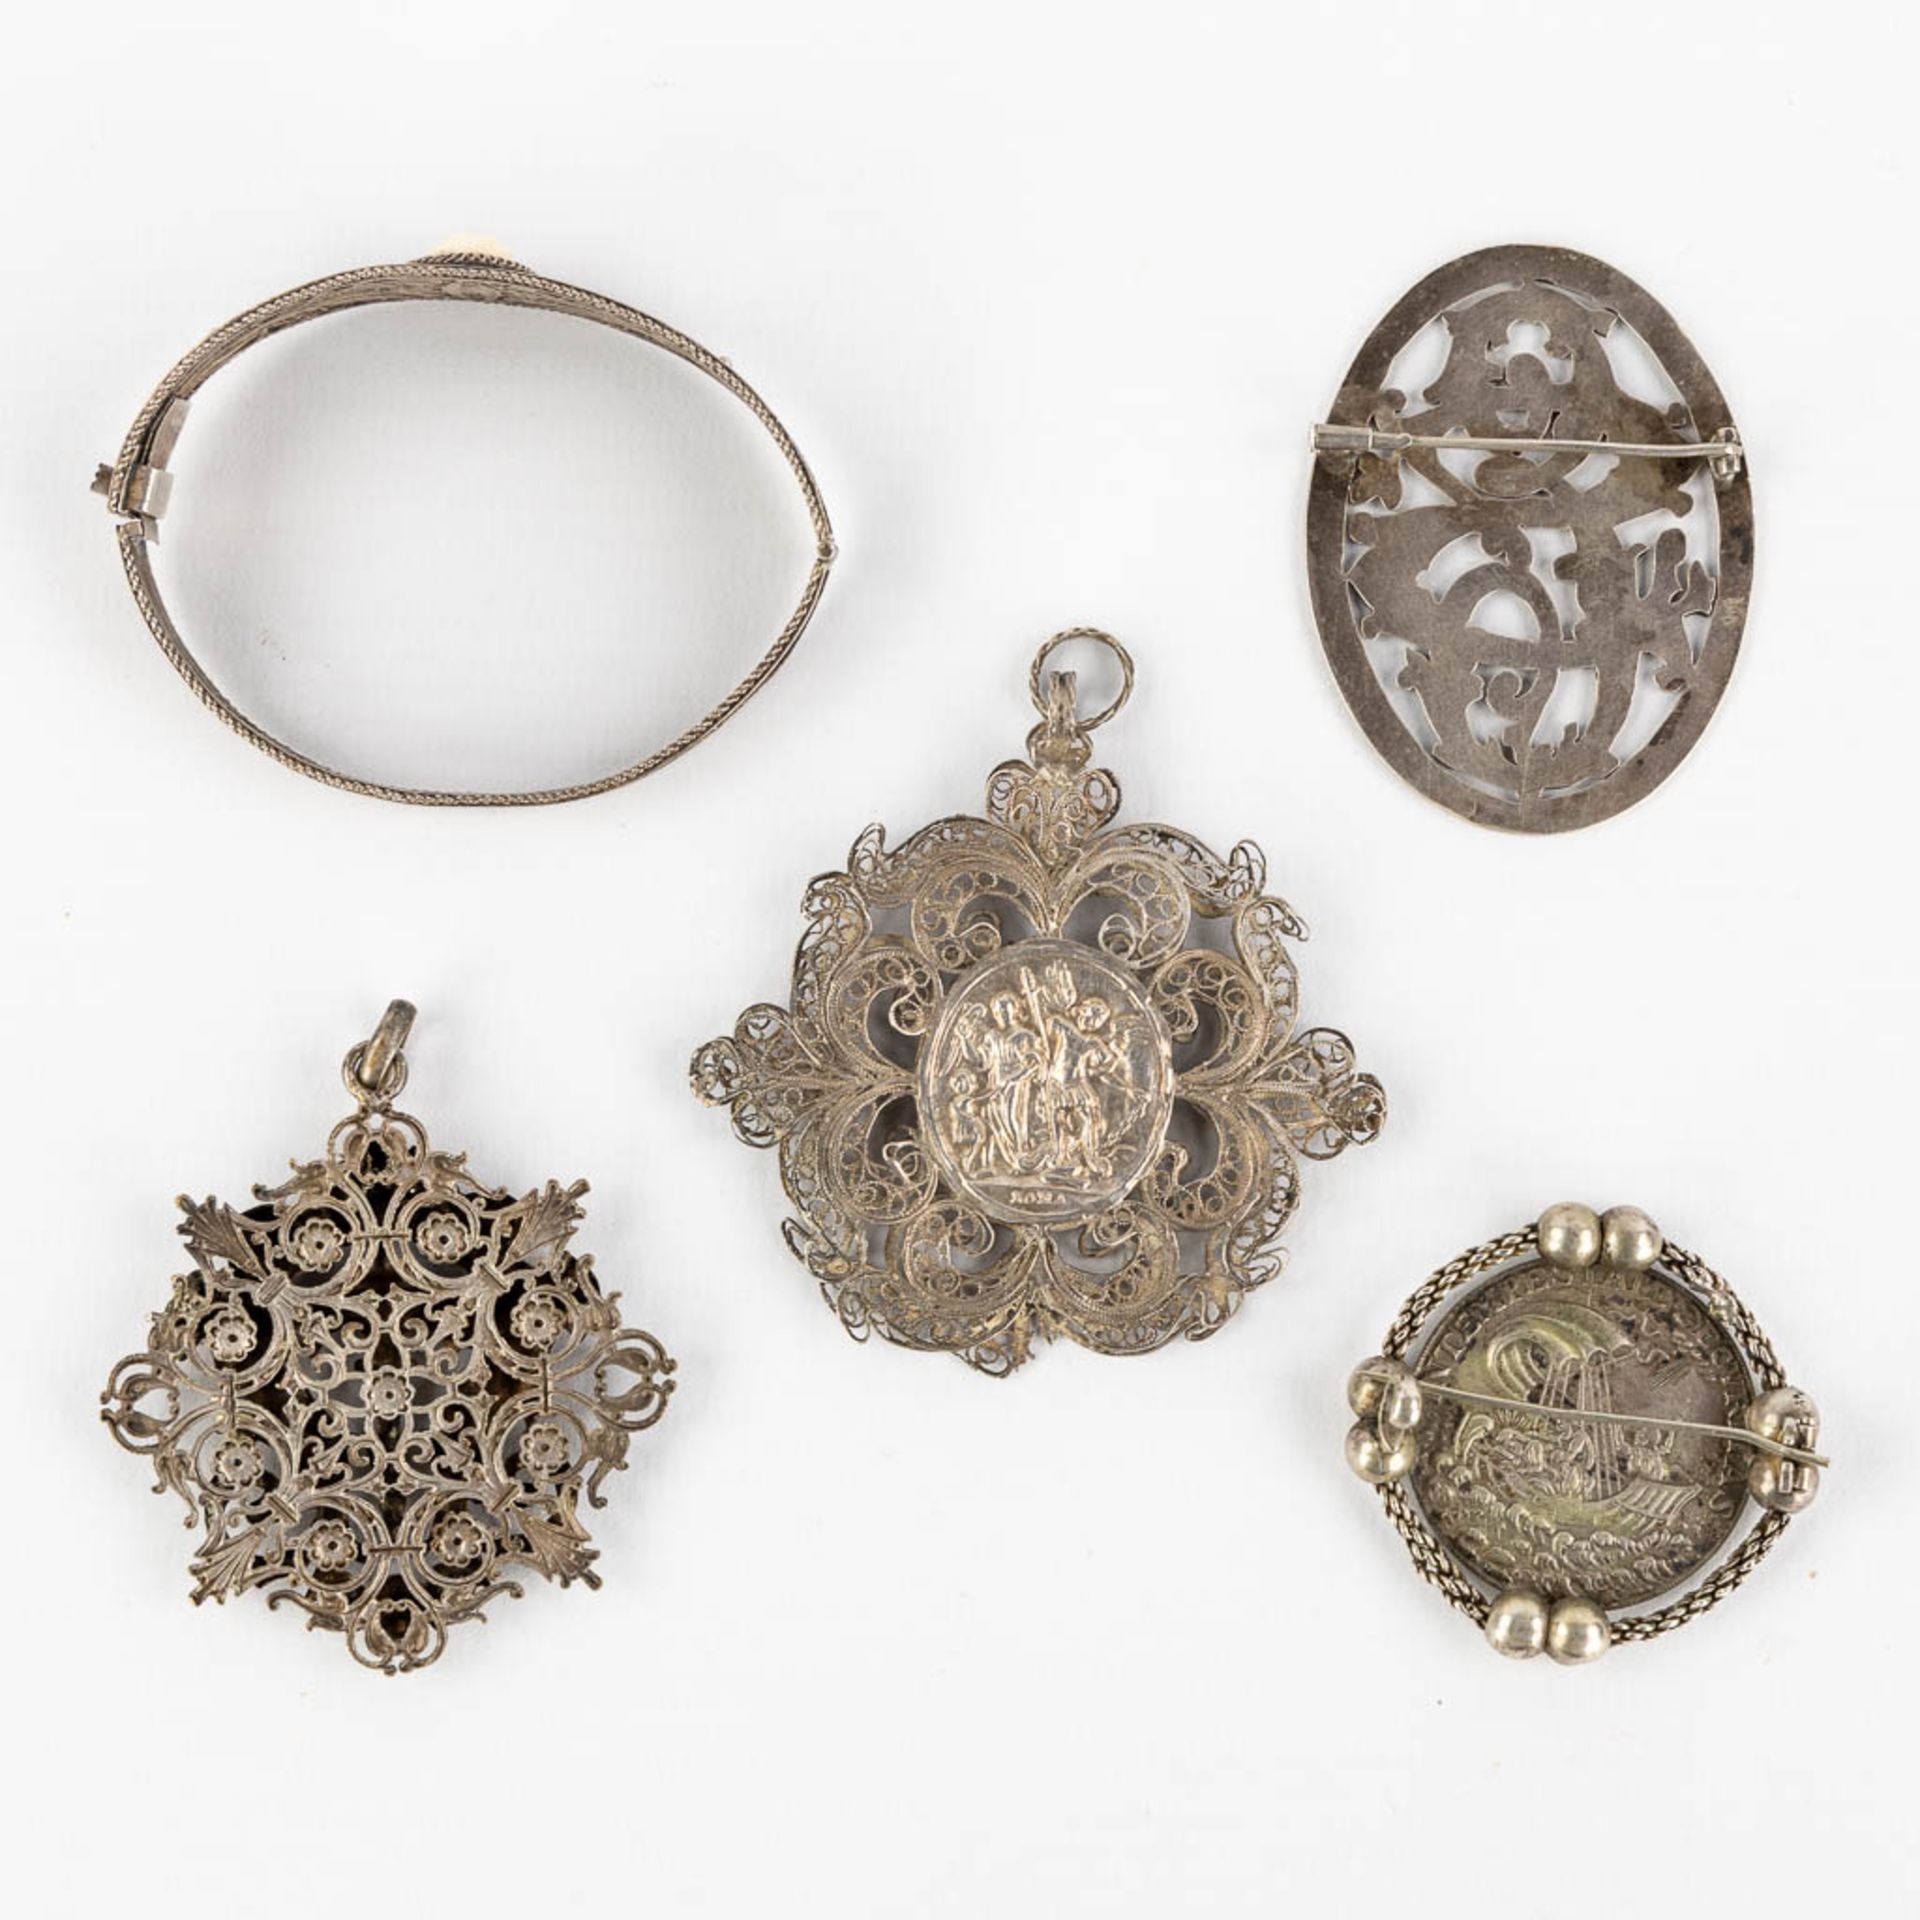 A collection of silver brooches, pendants and bracelets, Filigrane silver. 90g. (H:7 cm) - Image 3 of 8